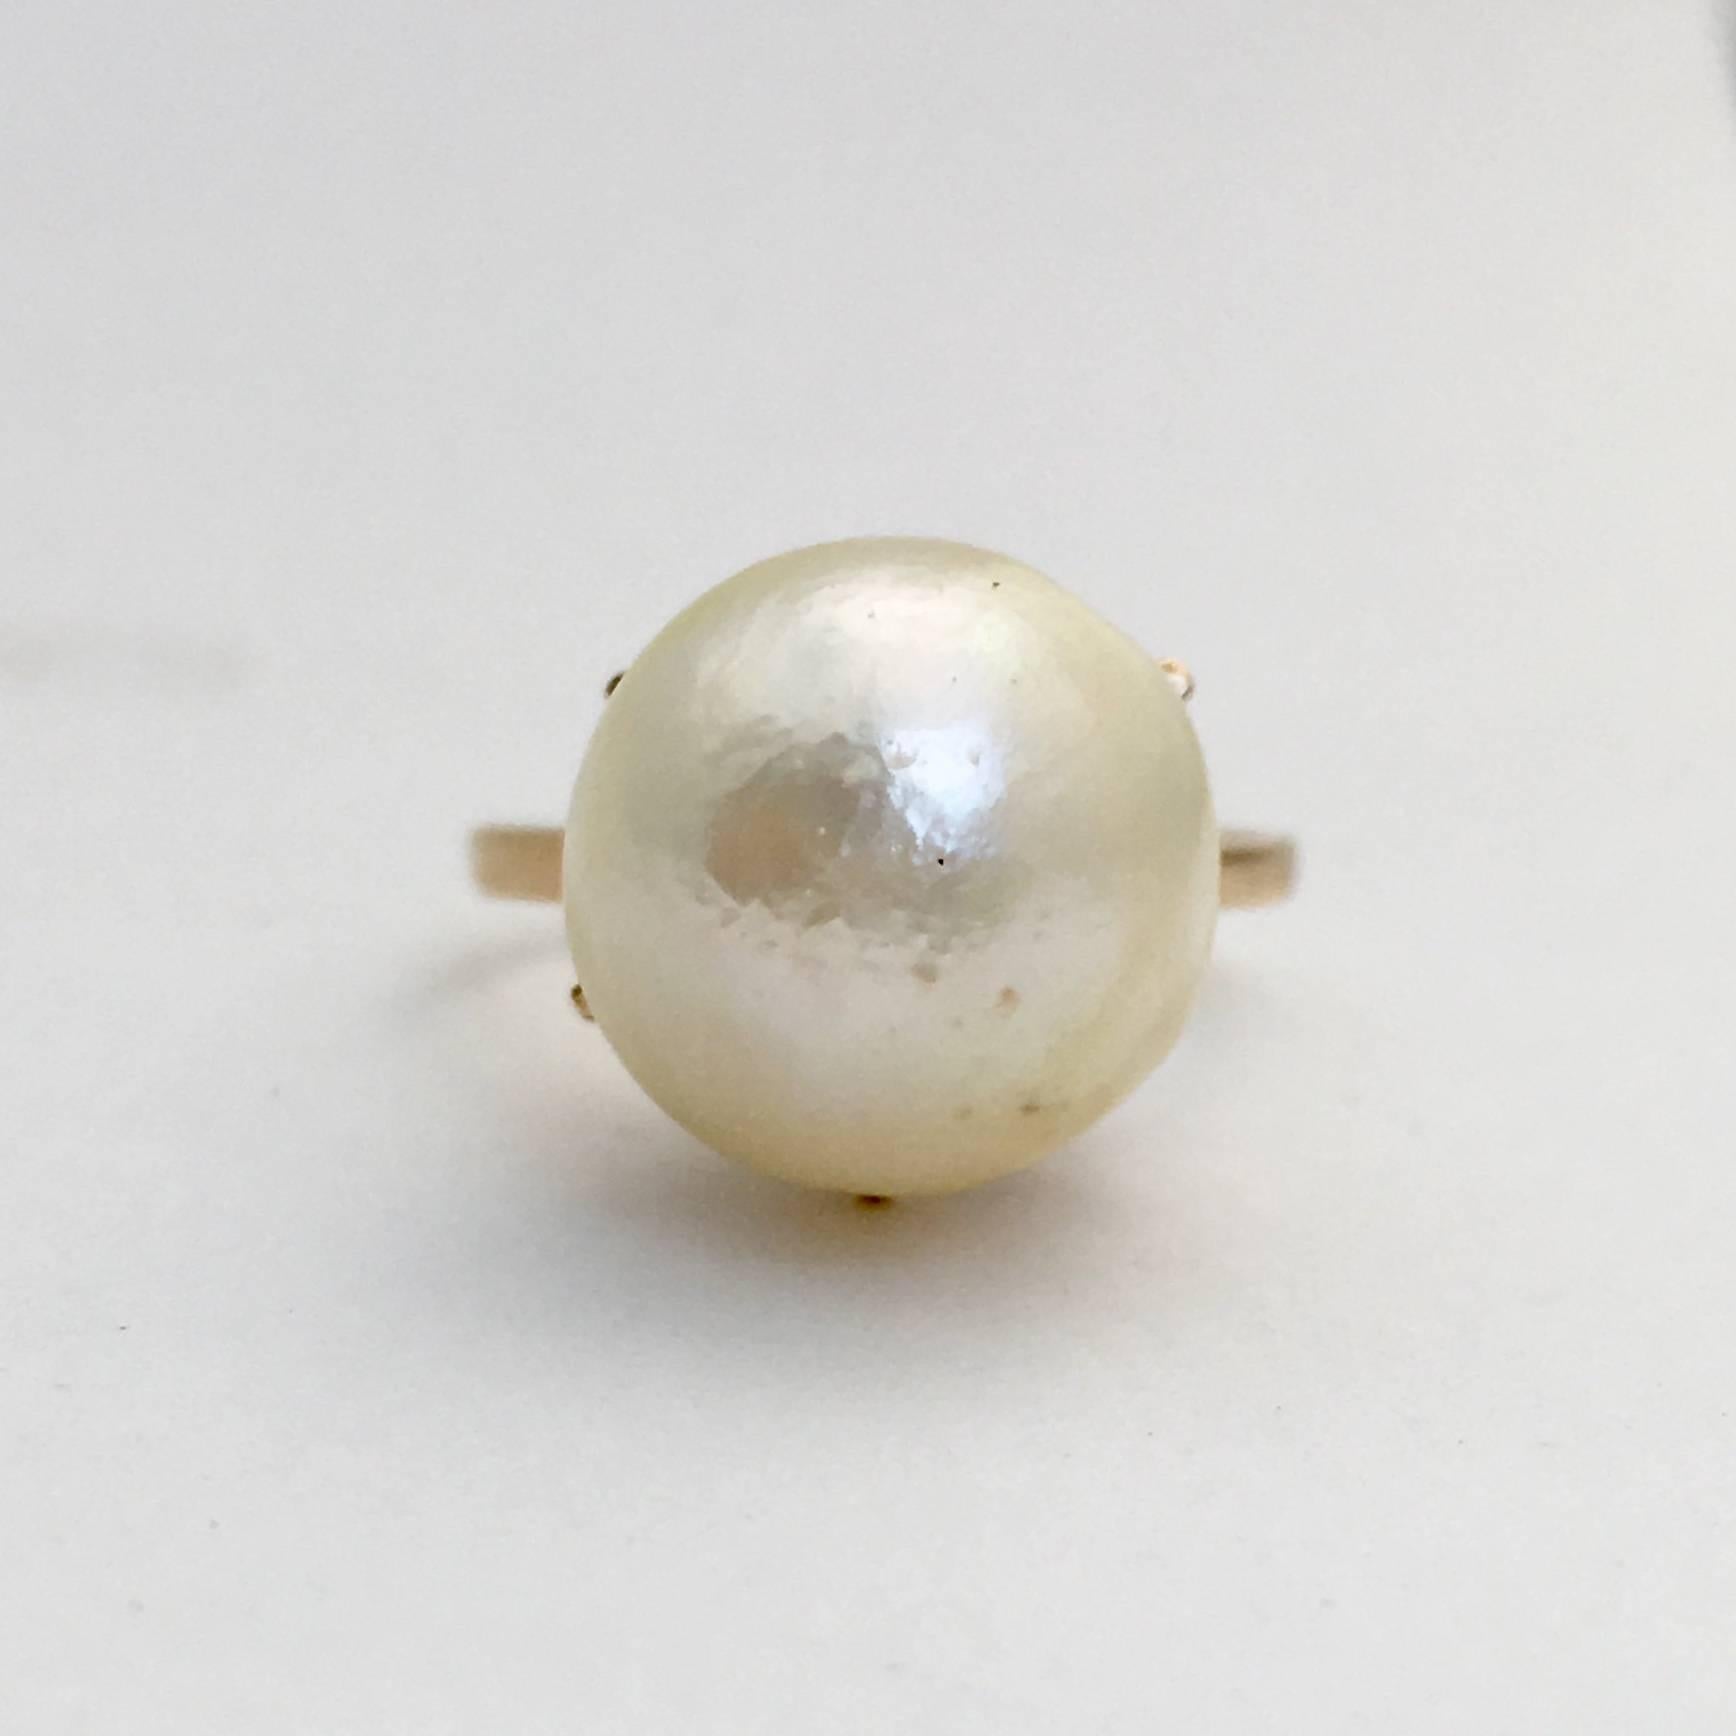 This striking vintage cocktail ring was made in London in 1959. The sizeable baroque pearl measures 1.2cm by 1.2cm and nestles in its 9ct yellow gold pronged setting. The pearl has long been a staple in jewellery elegance, favoured by style icons